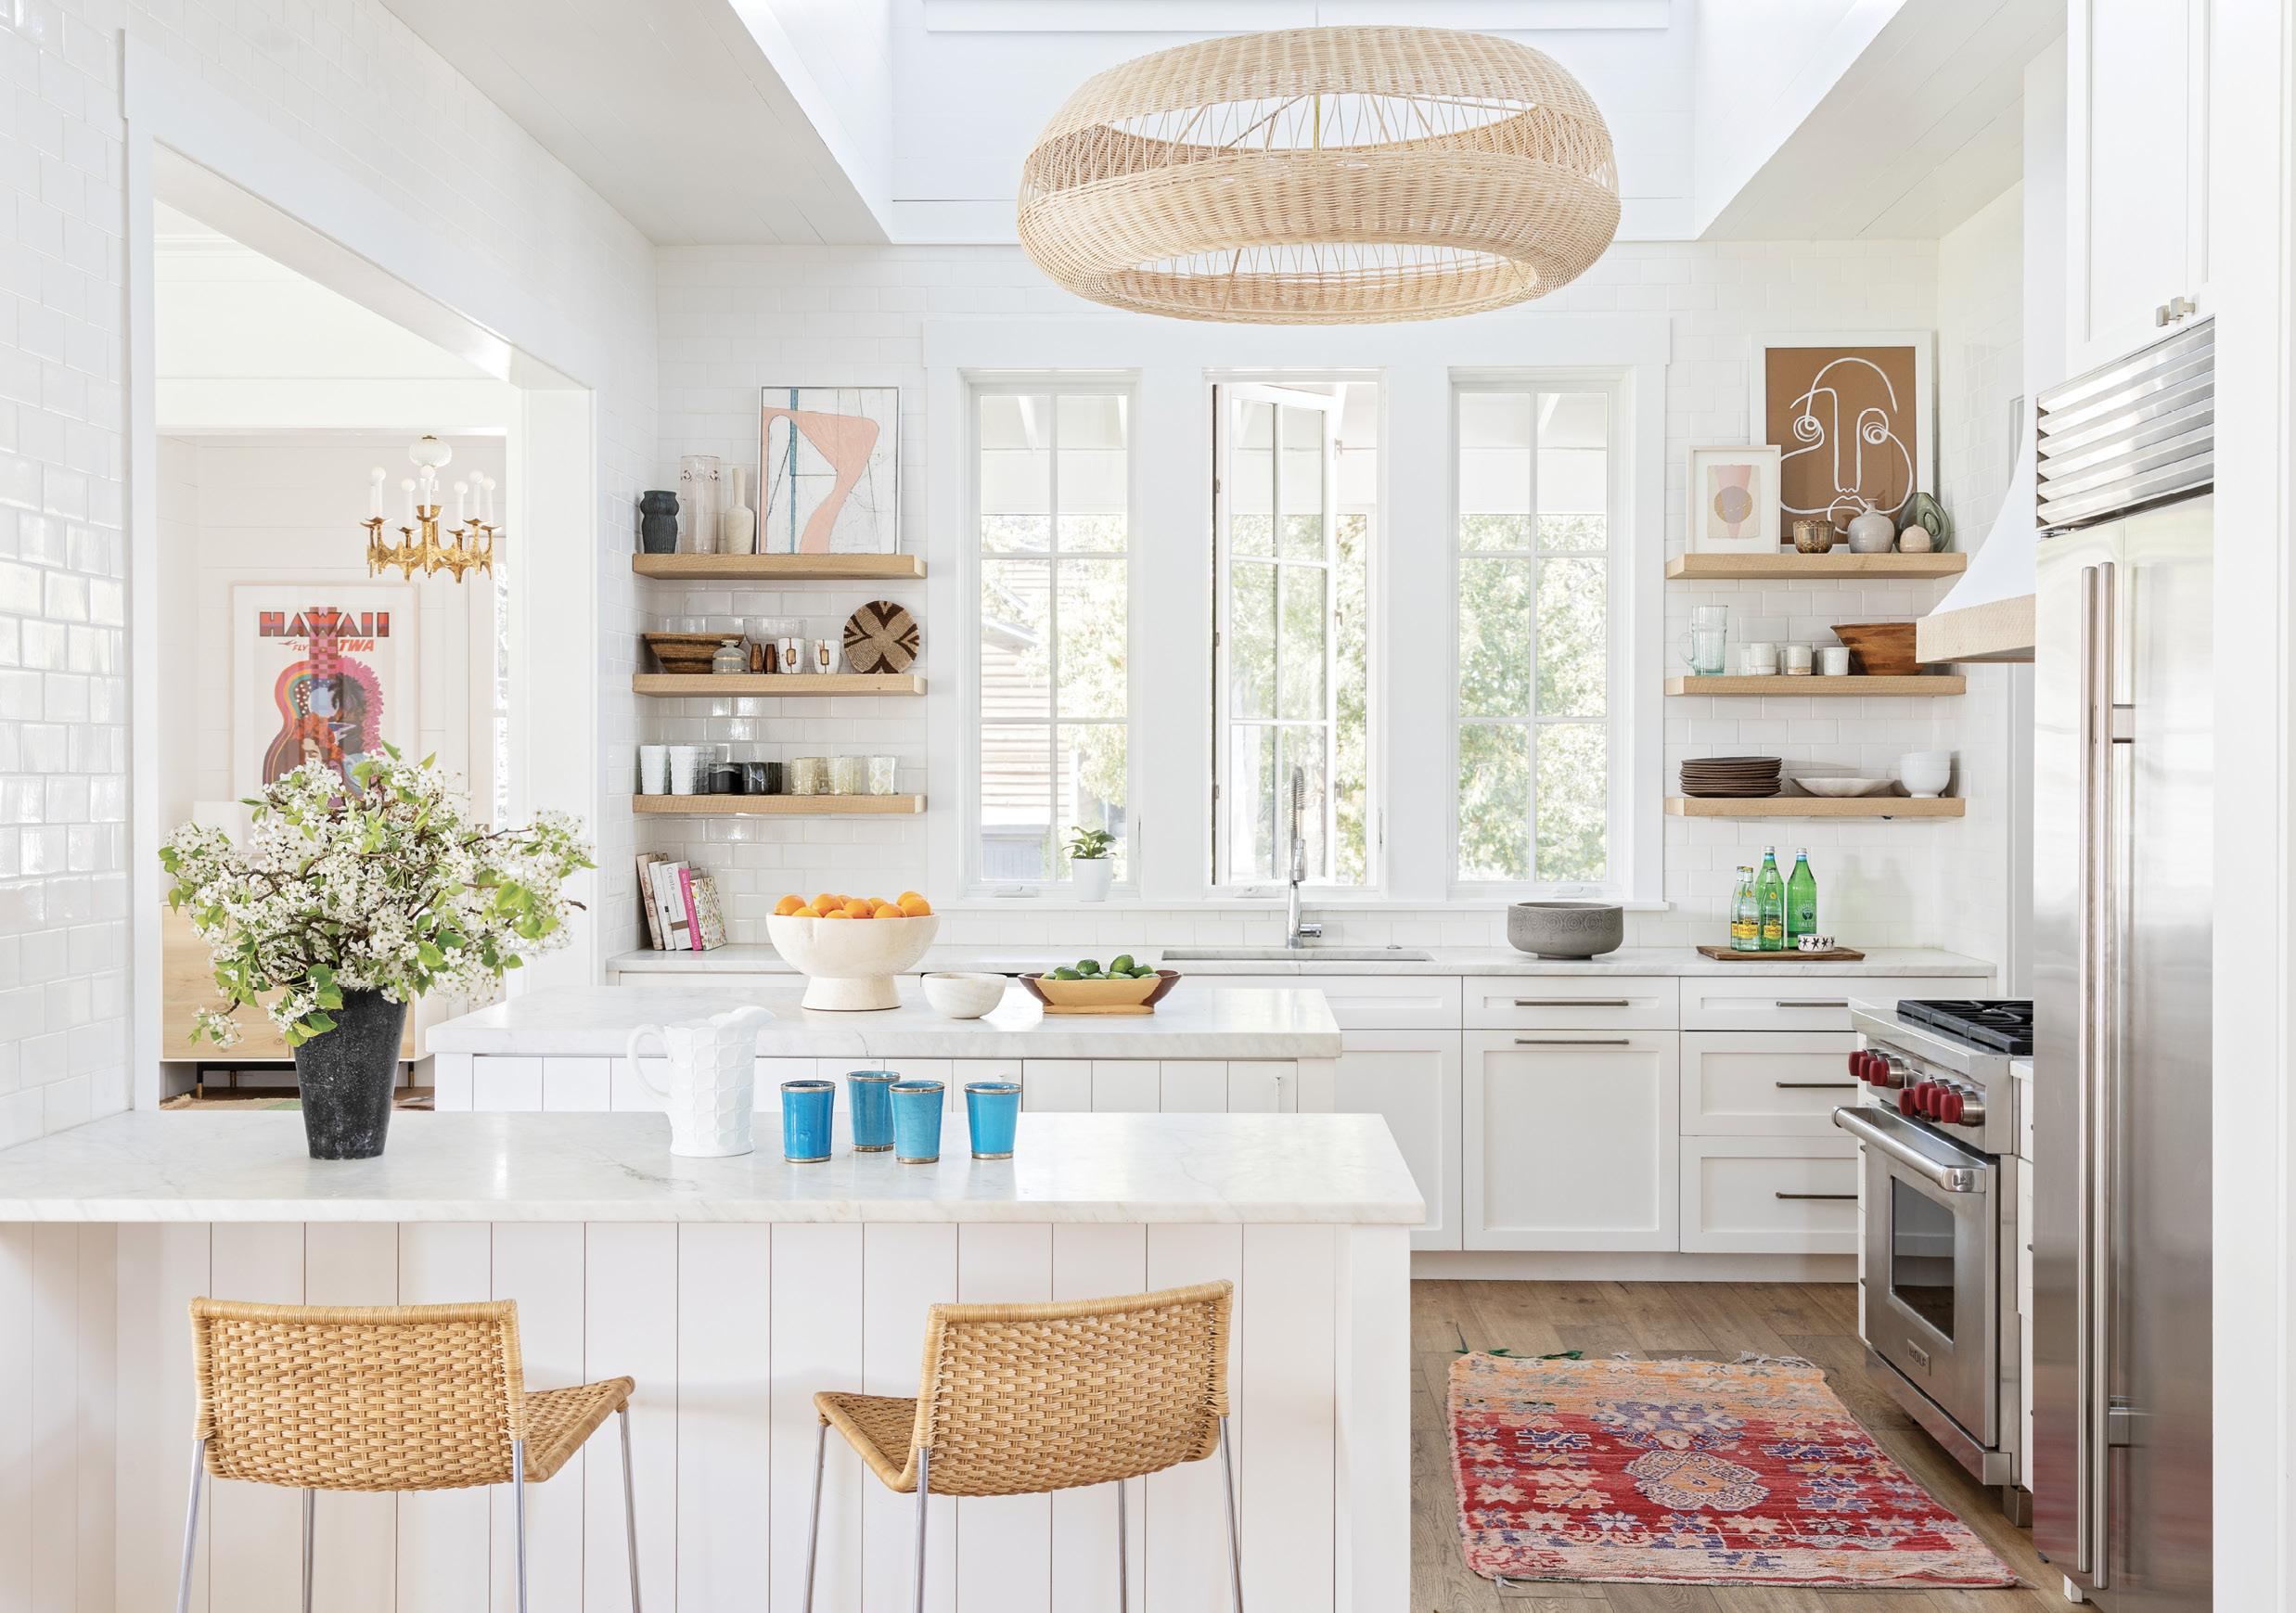 TIME FOR TEXTURE: The bright, white kitchen was revived with some key texture changes: wooden shelves replaced painted ones and a stainless steel hood was swapped for plaster trimmed in oak.